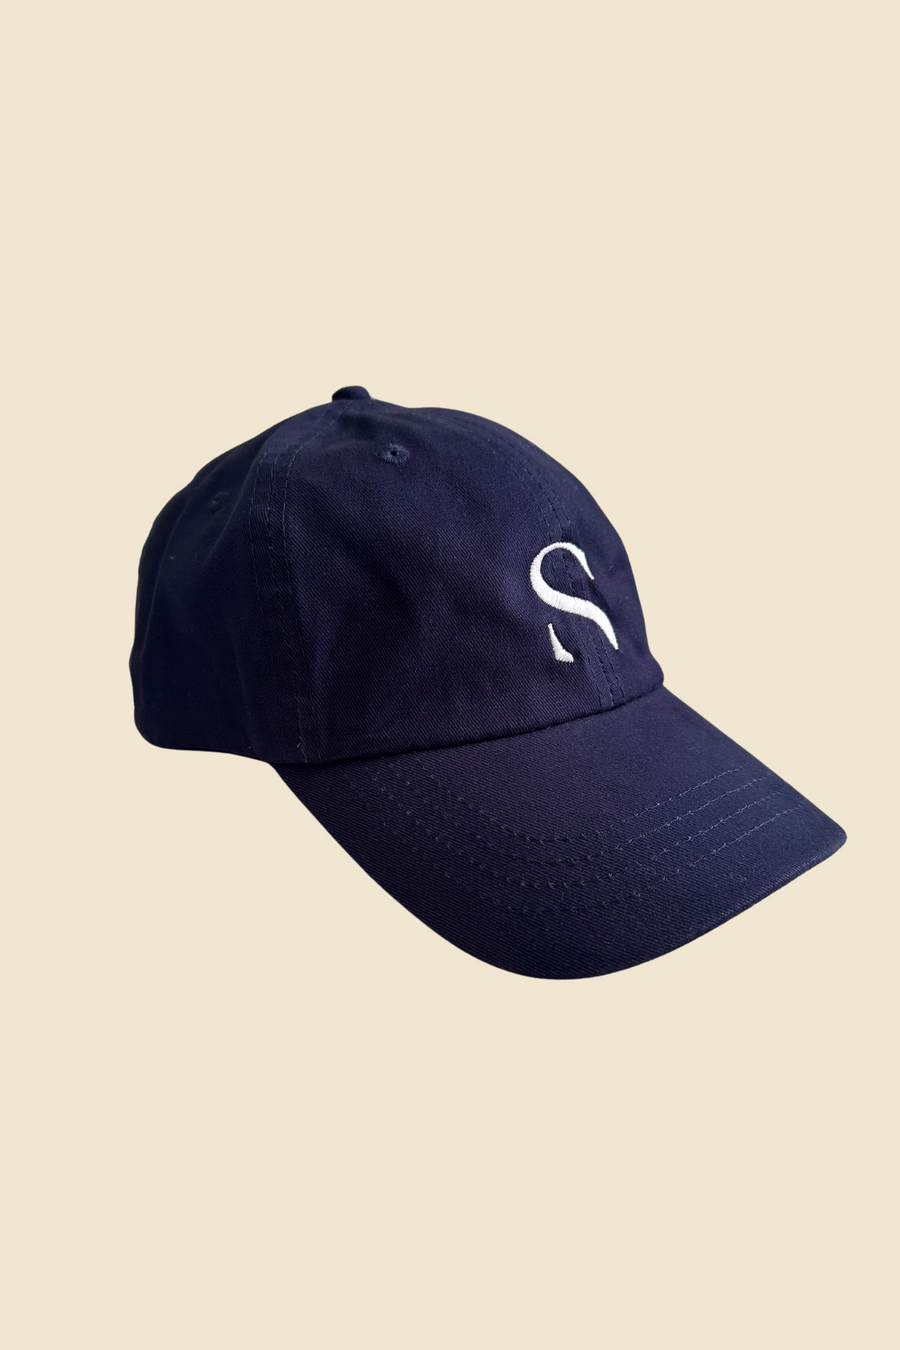 Sitano's Merch with a Mission Baseball Cap